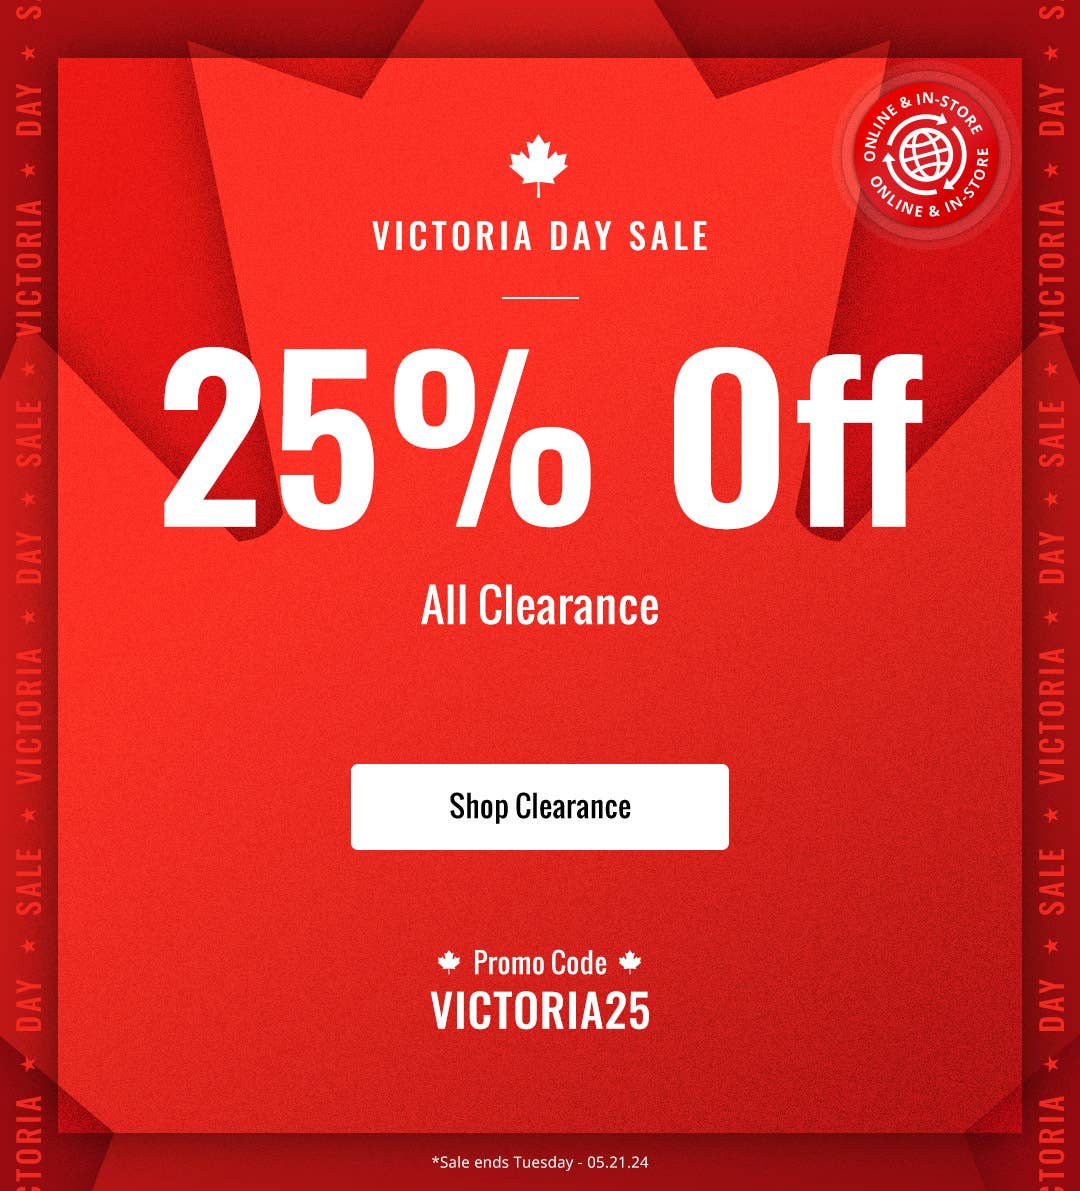 Victoria Day Sale: 25% off clearance